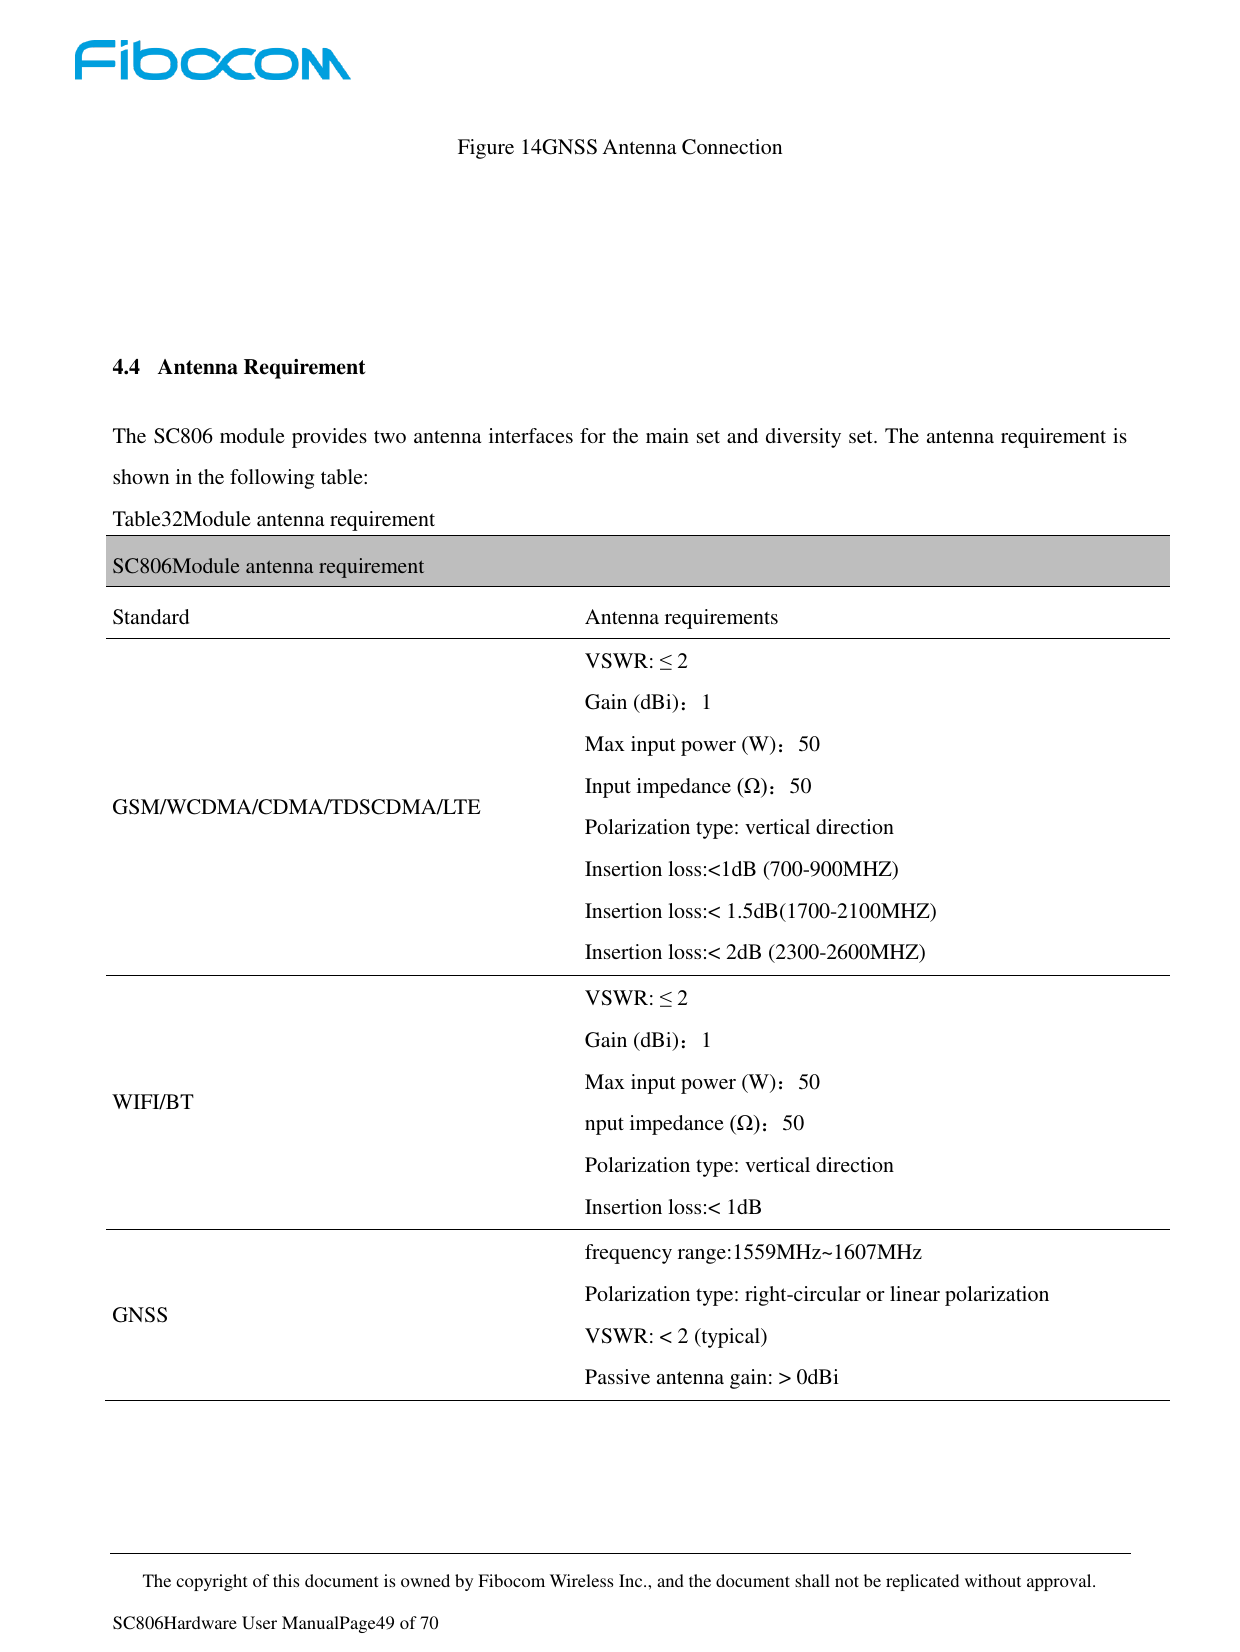     The copyright of this document is owned by Fibocom Wireless Inc., and the document shall not be replicated without approval.   SC806Hardware User ManualPage49 of 70 Figure 14GNSS Antenna Connection     4.4 Antenna Requirement The SC806 module provides two antenna interfaces for the main set and diversity set. The antenna requirement is shown in the following table: Table32Module antenna requirement SC806Module antenna requirement Standard Antenna requirements GSM/WCDMA/CDMA/TDSCDMA/LTE VSWR: ≤ 2 Gain (dBi)：1 Max input power (W)：50 Input impedance (Ω)：50 Polarization type: vertical direction Insertion loss:&lt;1dB (700-900MHZ) Insertion loss:&lt; 1.5dB(1700-2100MHZ) Insertion loss:&lt; 2dB (2300-2600MHZ) WIFI/BT VSWR: ≤ 2 Gain (dBi)：1 Max input power (W)：50 nput impedance (Ω)：50 Polarization type: vertical direction Insertion loss:&lt; 1dB GNSS frequency range:1559MHz~1607MHz Polarization type: right-circular or linear polarization VSWR: &lt; 2 (typical) Passive antenna gain: &gt; 0dBi   